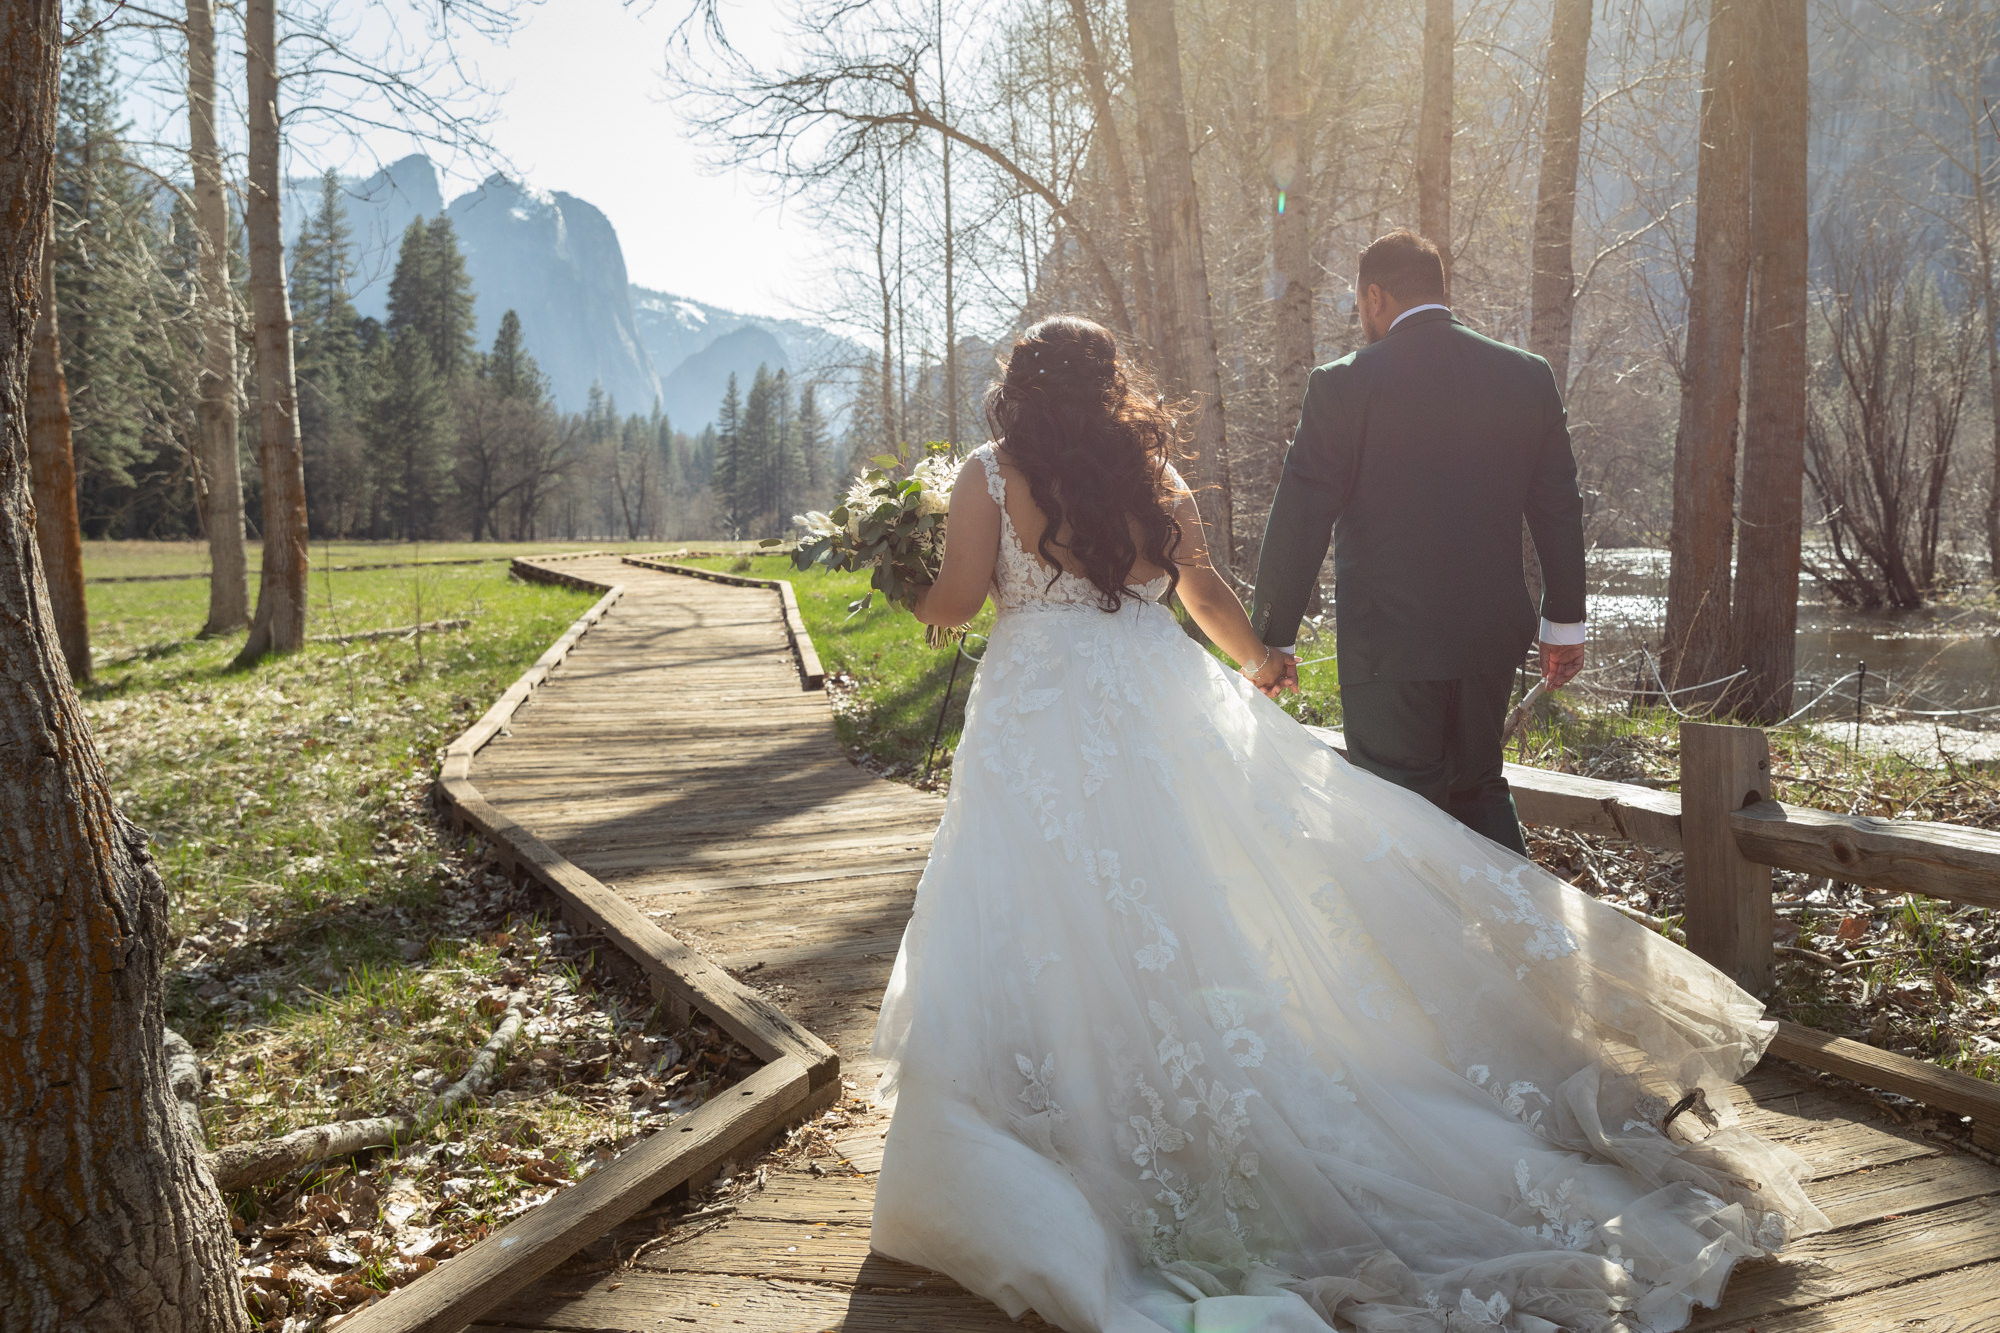 A bride and groom walk hand in hand down a wooden boardwalk in Yosemite as her elopement wedding dress blows in the wind.